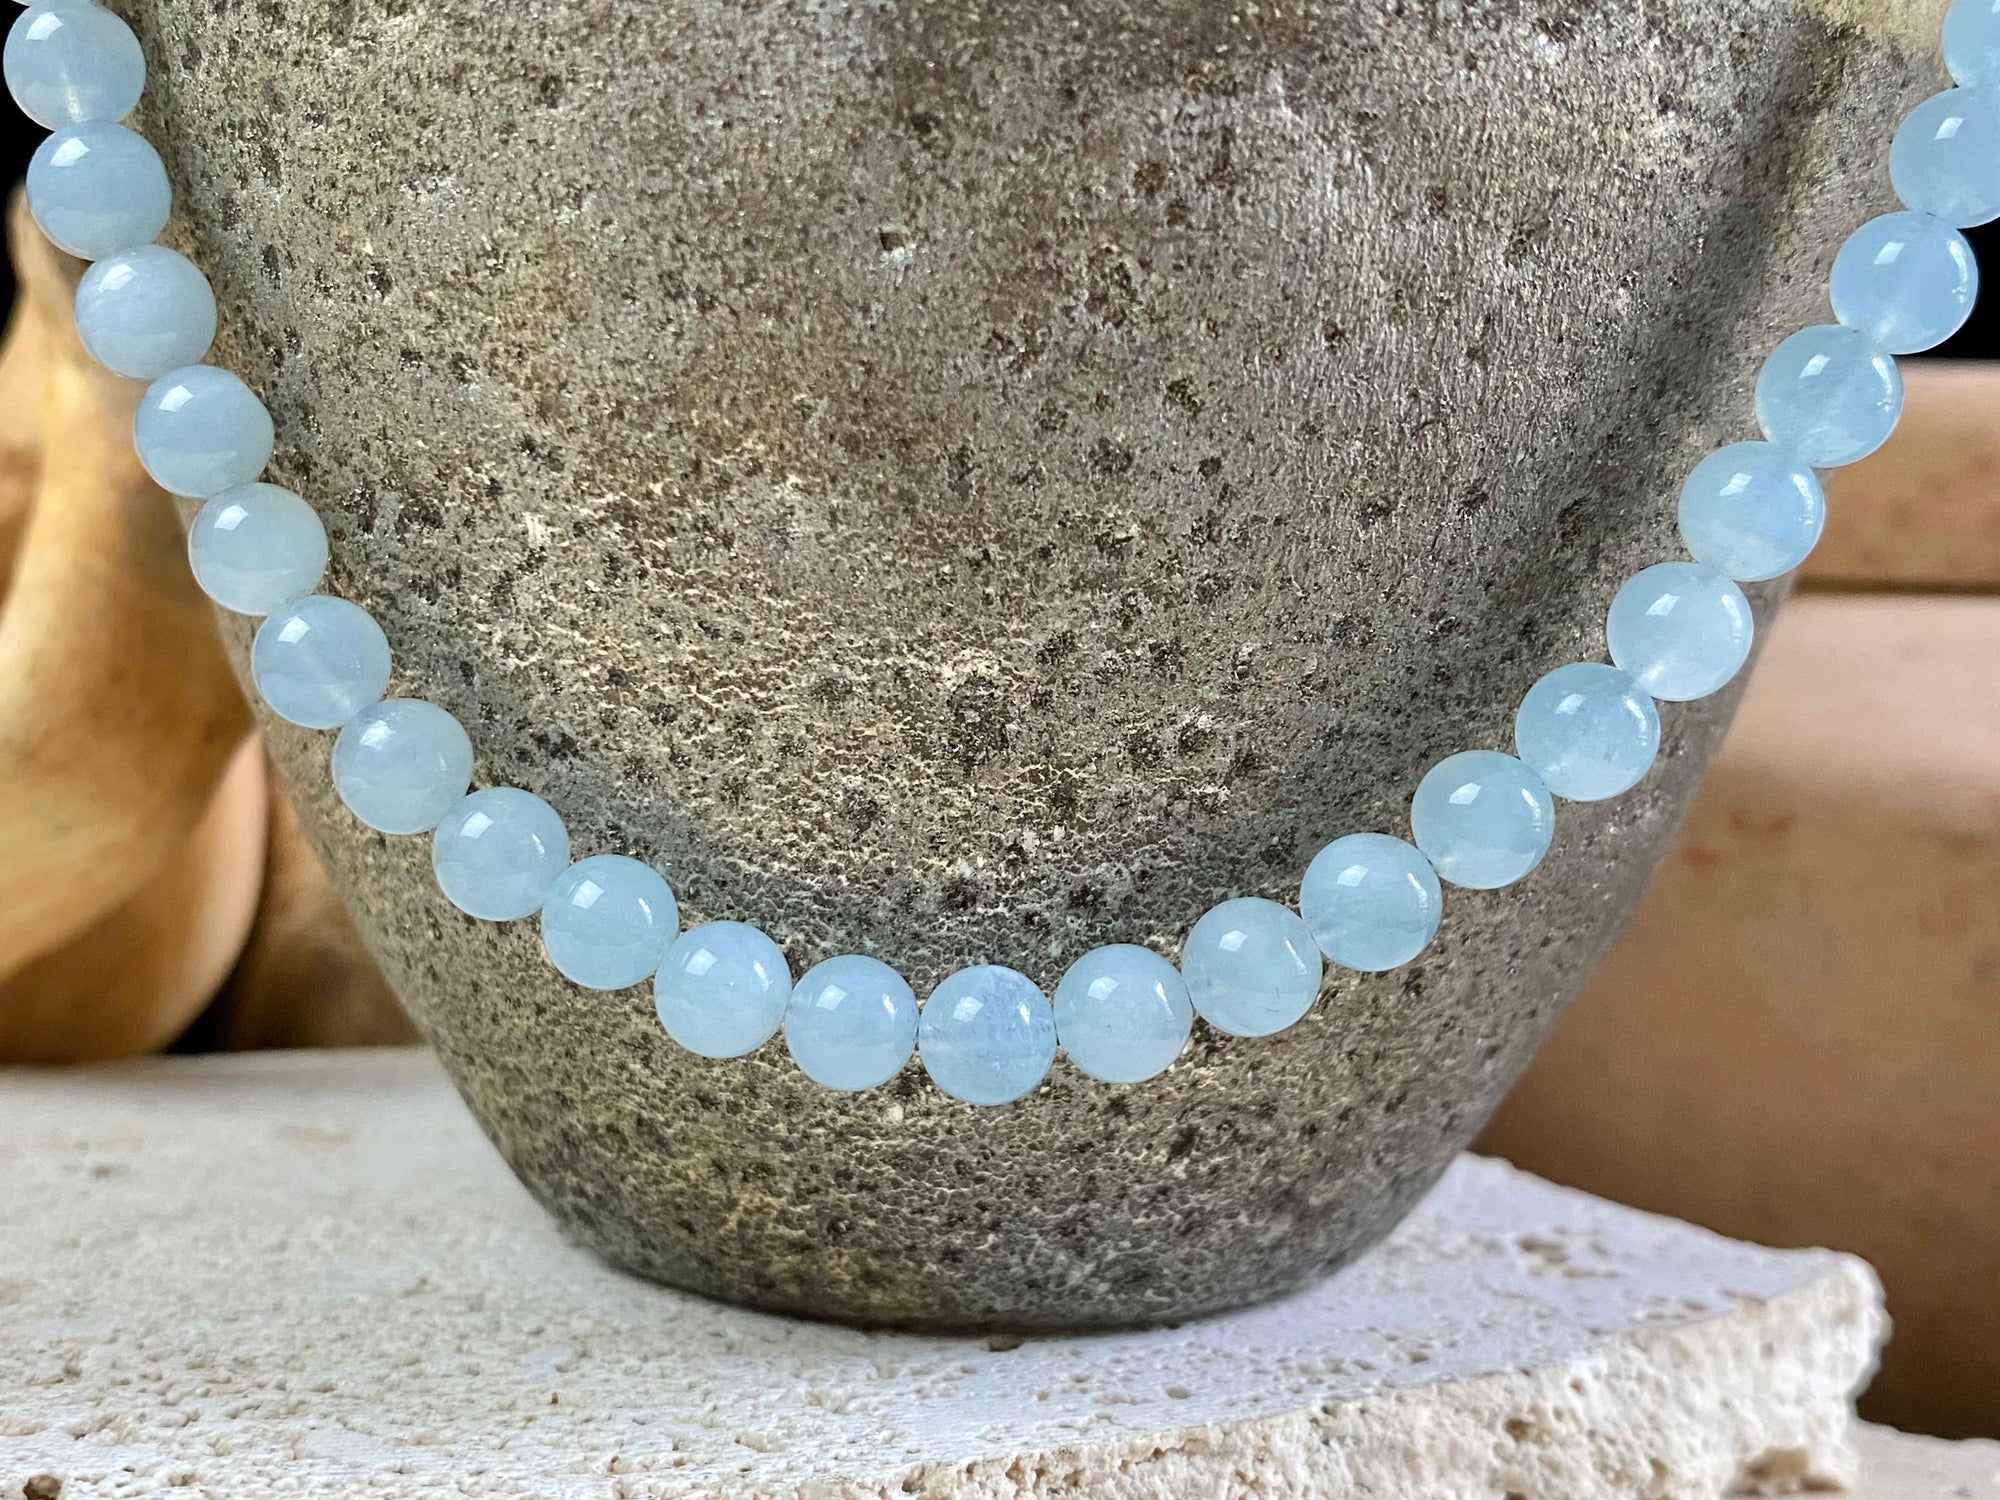 Natural aquamarine necklace featuring round aquamarine beads and a sterling silver clasp.   The aquamarines are matched a light and even blue of beautiful quality. Measurements: 47.5 cm